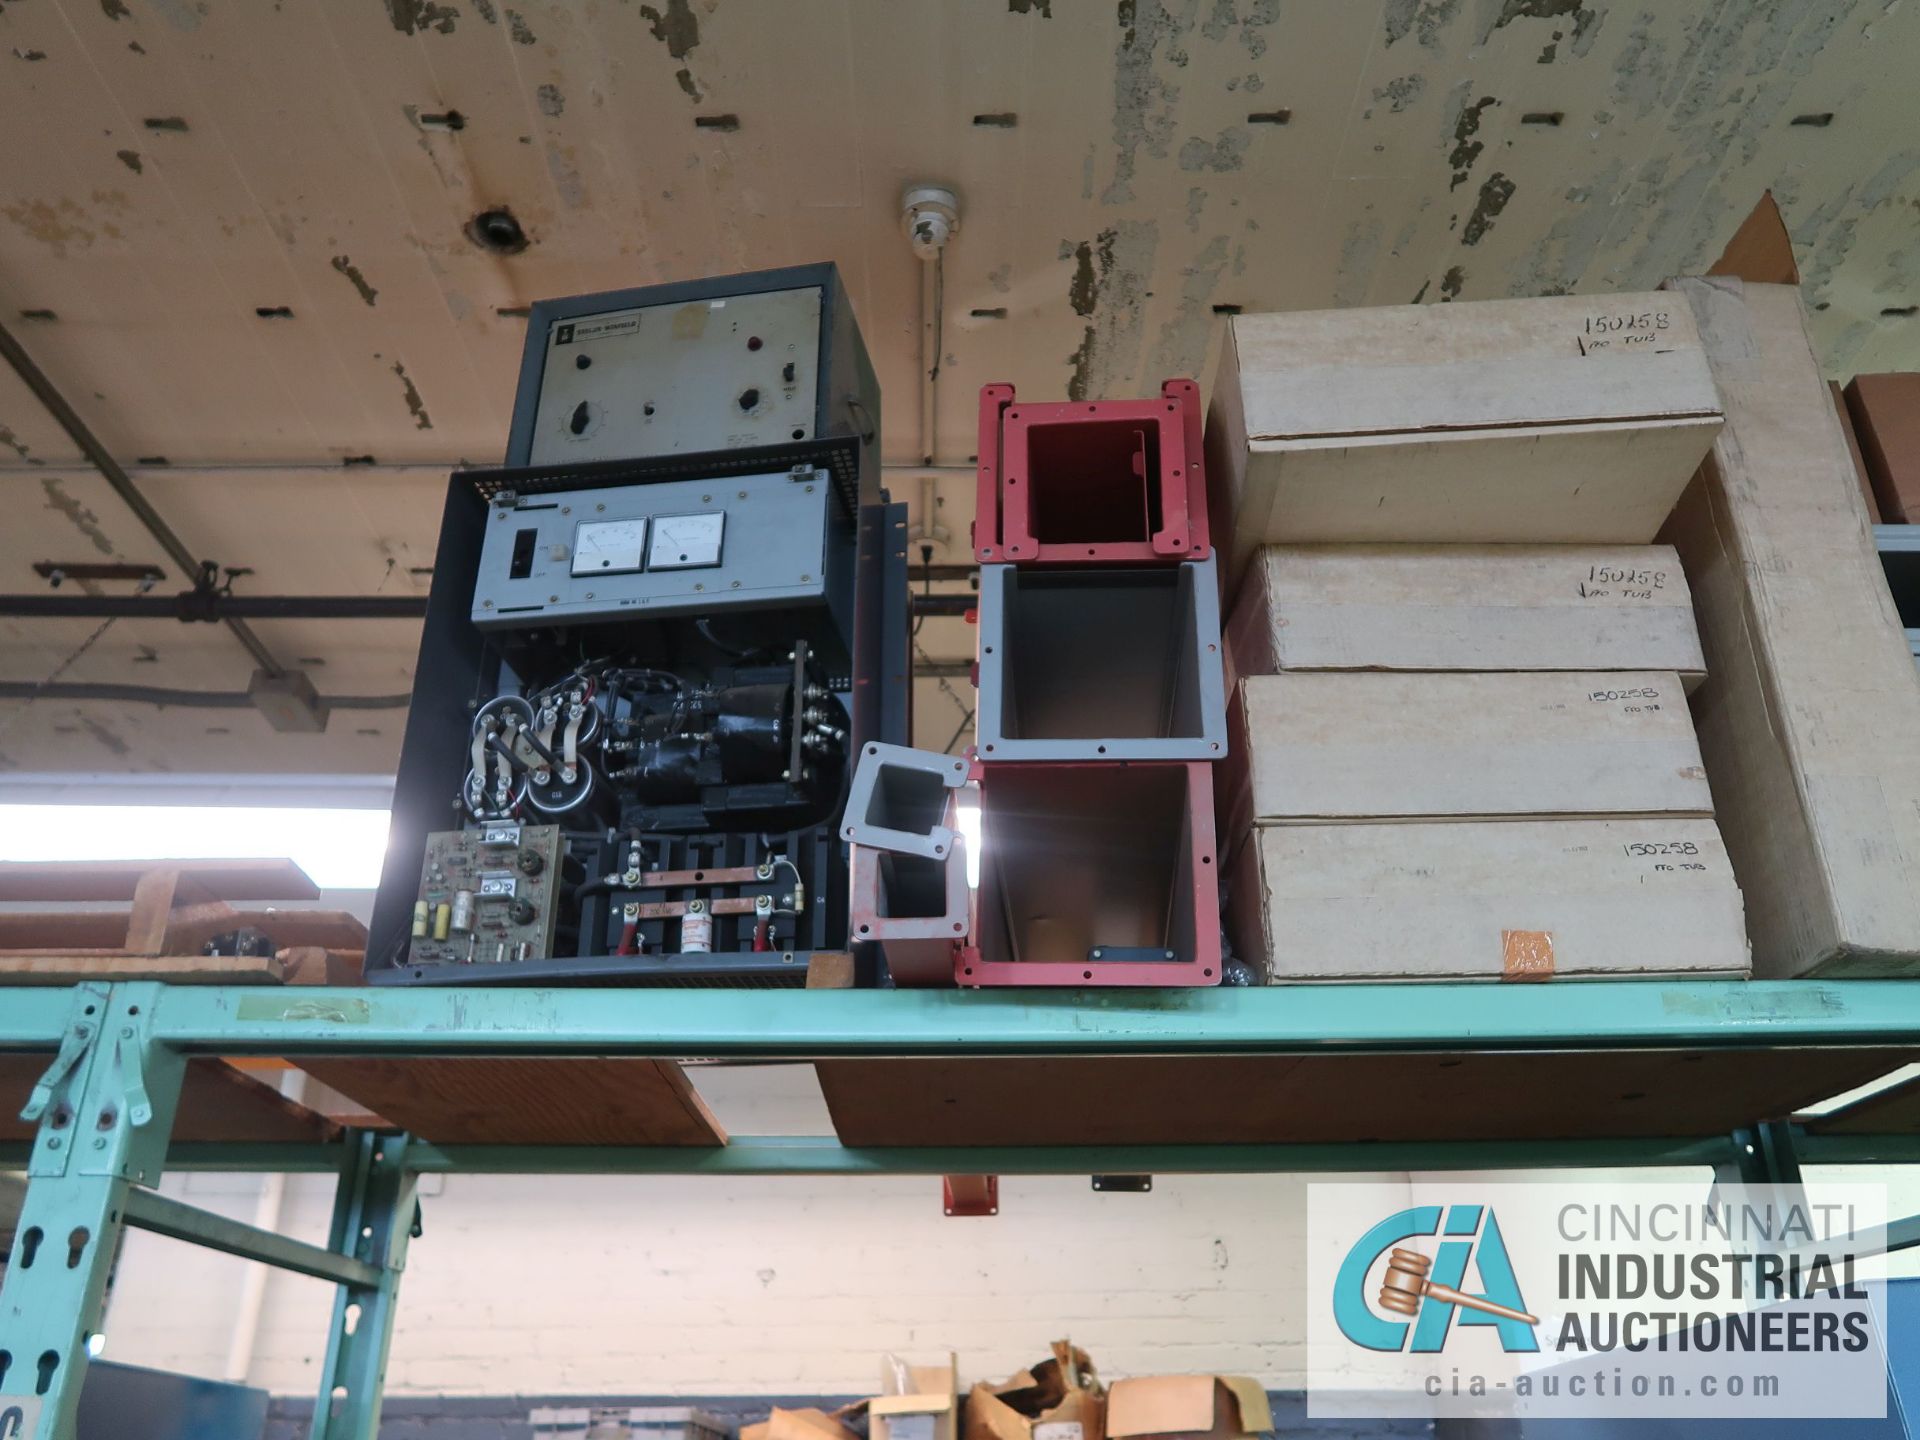 CONTENTS OF (4) RACKS INCLUDING MISCELLANEOUS ELECTRIC BOXES, PANELS, CONDUIT PANELS **NO RACKS** - Image 5 of 12